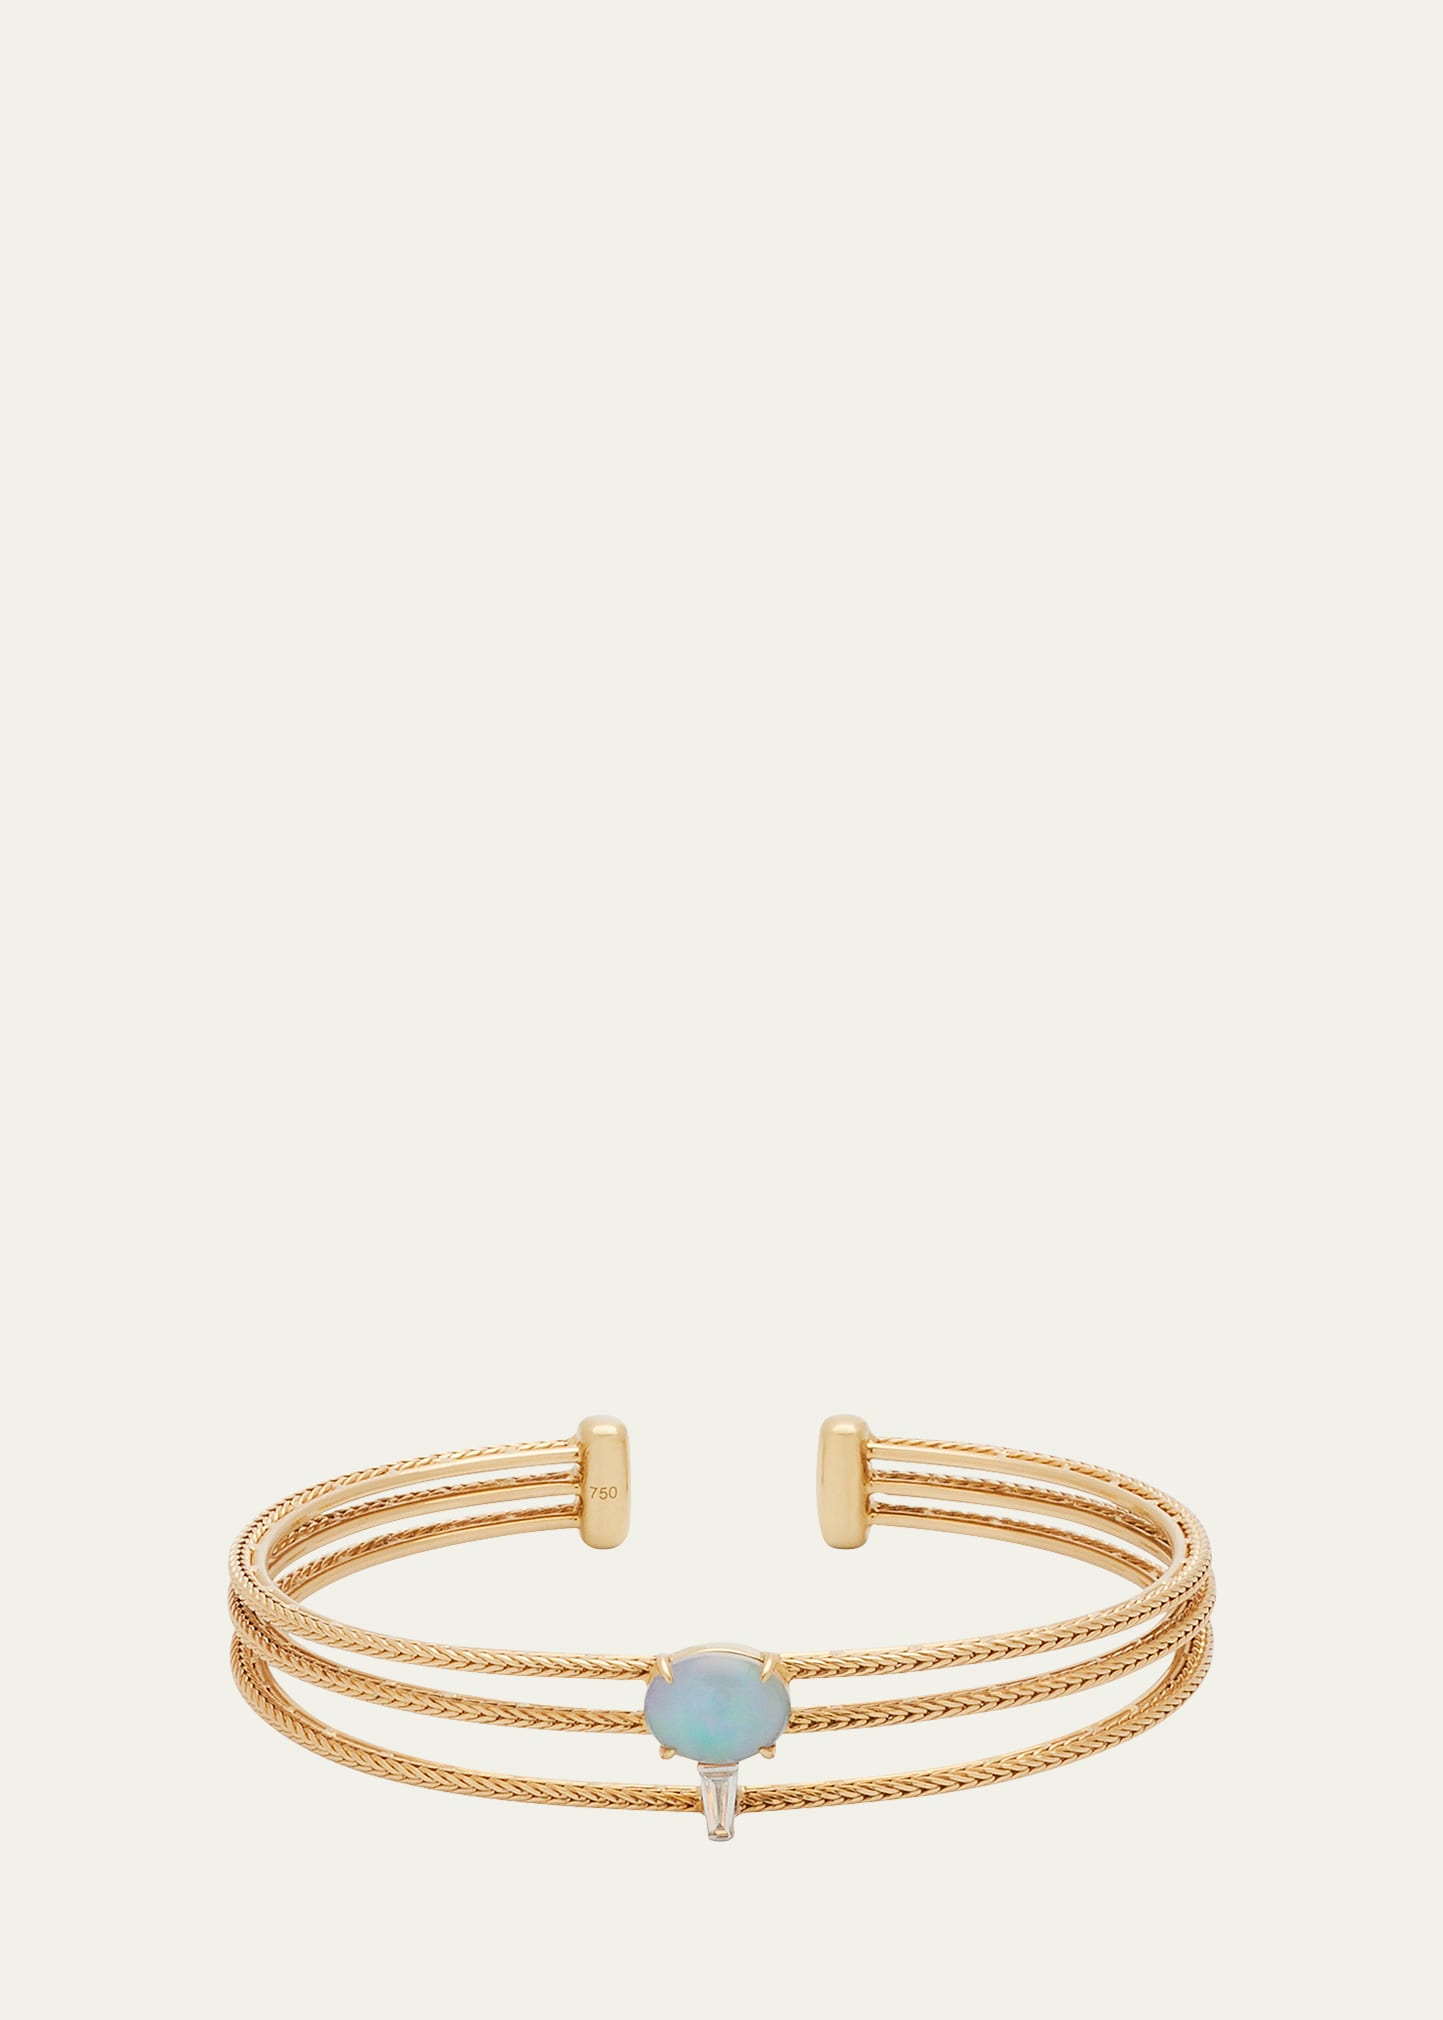 Together 3-Row Bracelet with Opal and Baguette White Diamond in Two-Tone 18K Gold